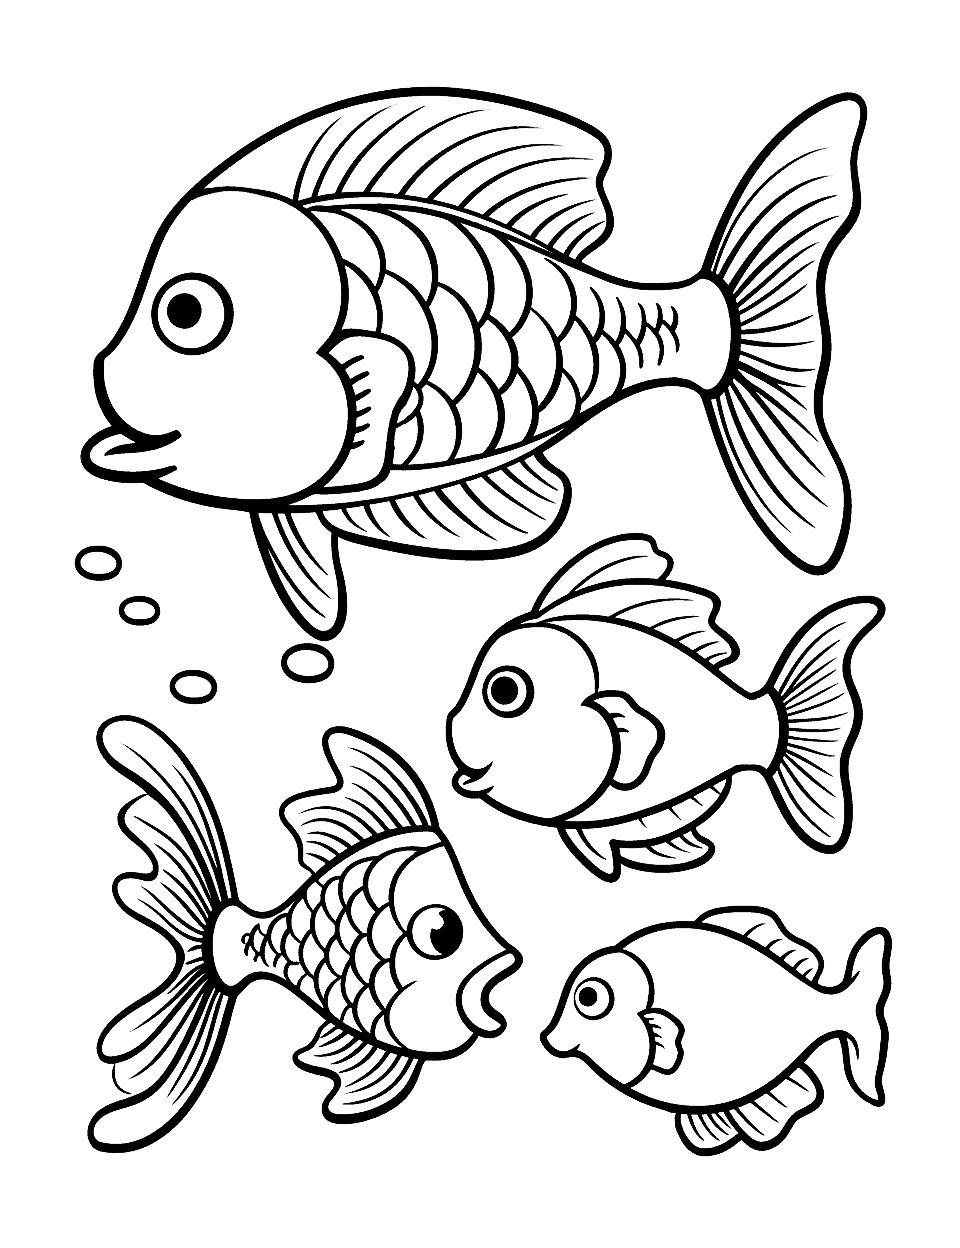 Kindergarten Fish Friends Coloring Page - Simplified fish shapes, perfect for a kindergarten student’s coloring fun.